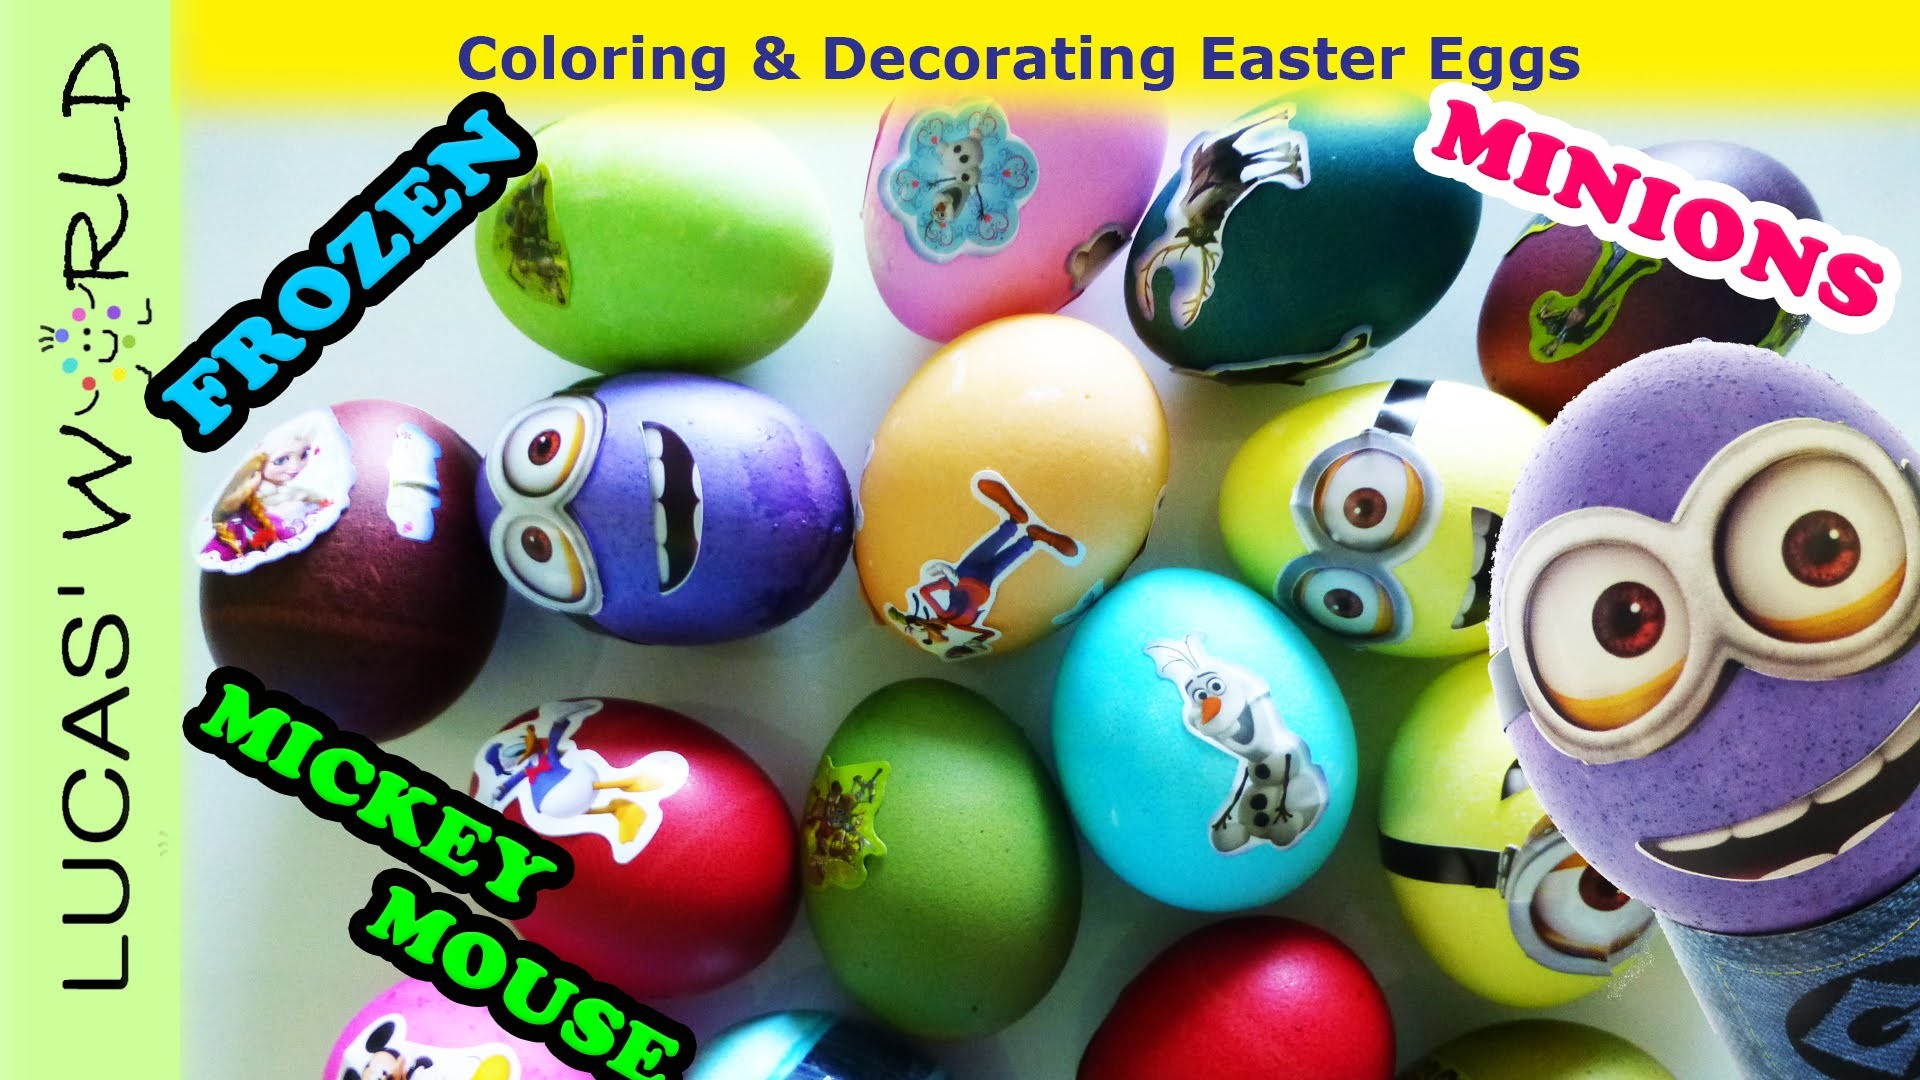 1920x1080 Kids DIY - Coloring Easter Eggs with MINIONS Disney FROZEN Mickey Mouse  Ninja Turtles Stickers - YouTube